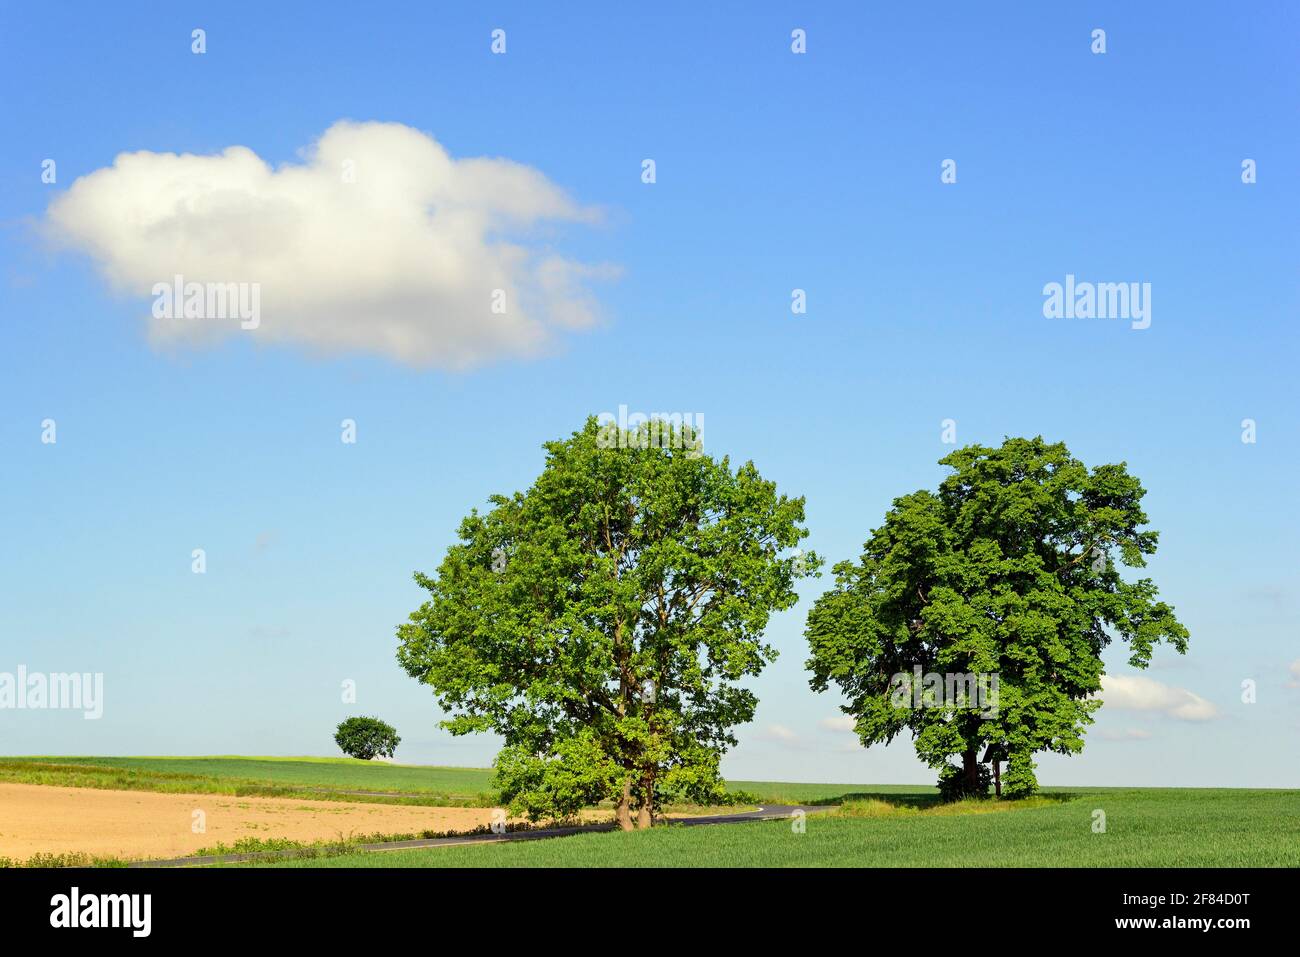 Deciduous trees at a country road, lime trees (Tilia) with wayside cross, blue sky with cloud, North Rhine-Westphalia, Germany Stock Photo